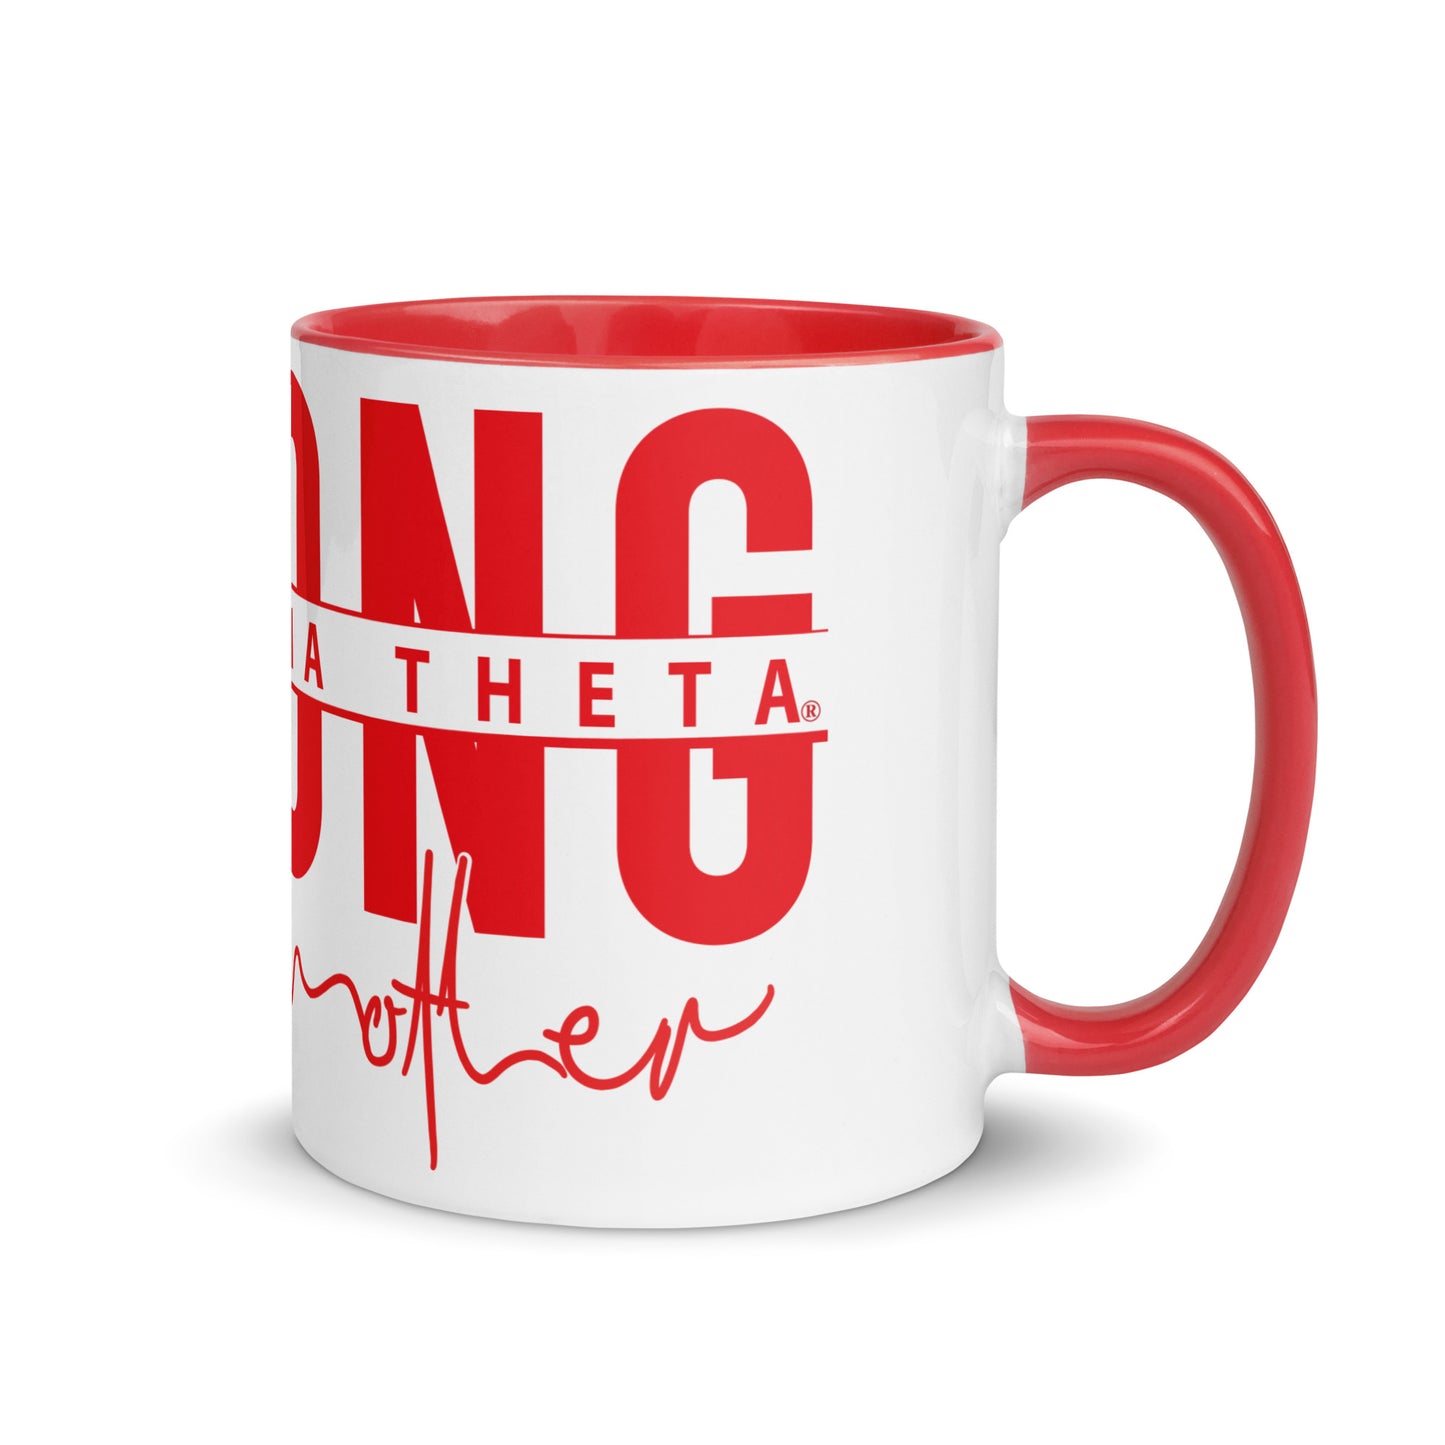 Delta Sigma Theta Strong Awesome Mother Mug with Color Inside